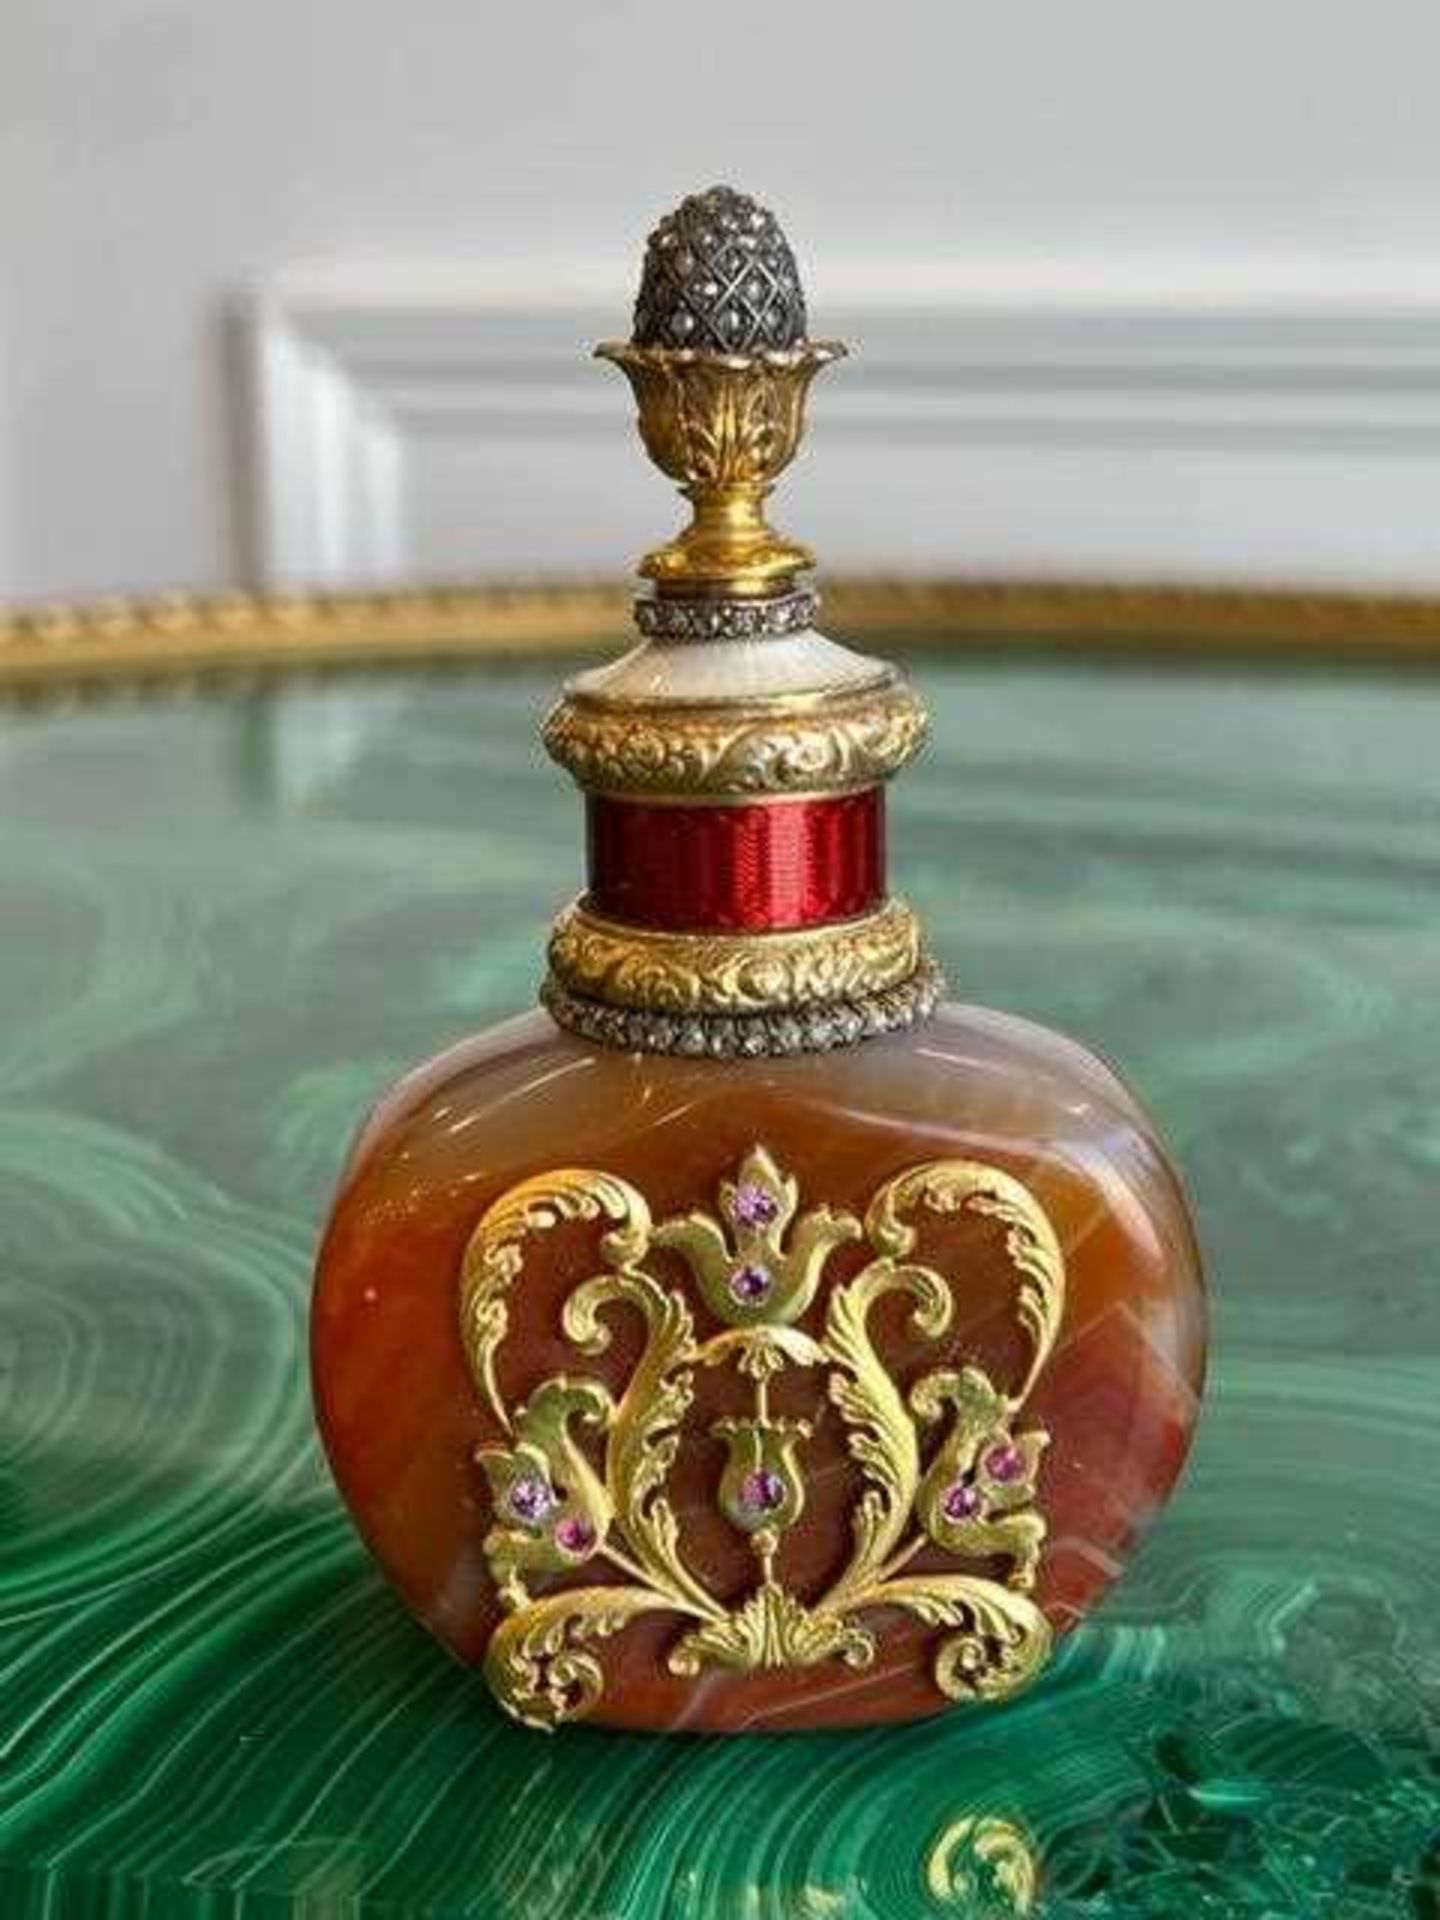 A FABERGE STYLE SILVER GILT, DIAMOND AND ENAMEL MOUNTED AGATE PERFUME BOTTLE - Image 6 of 14